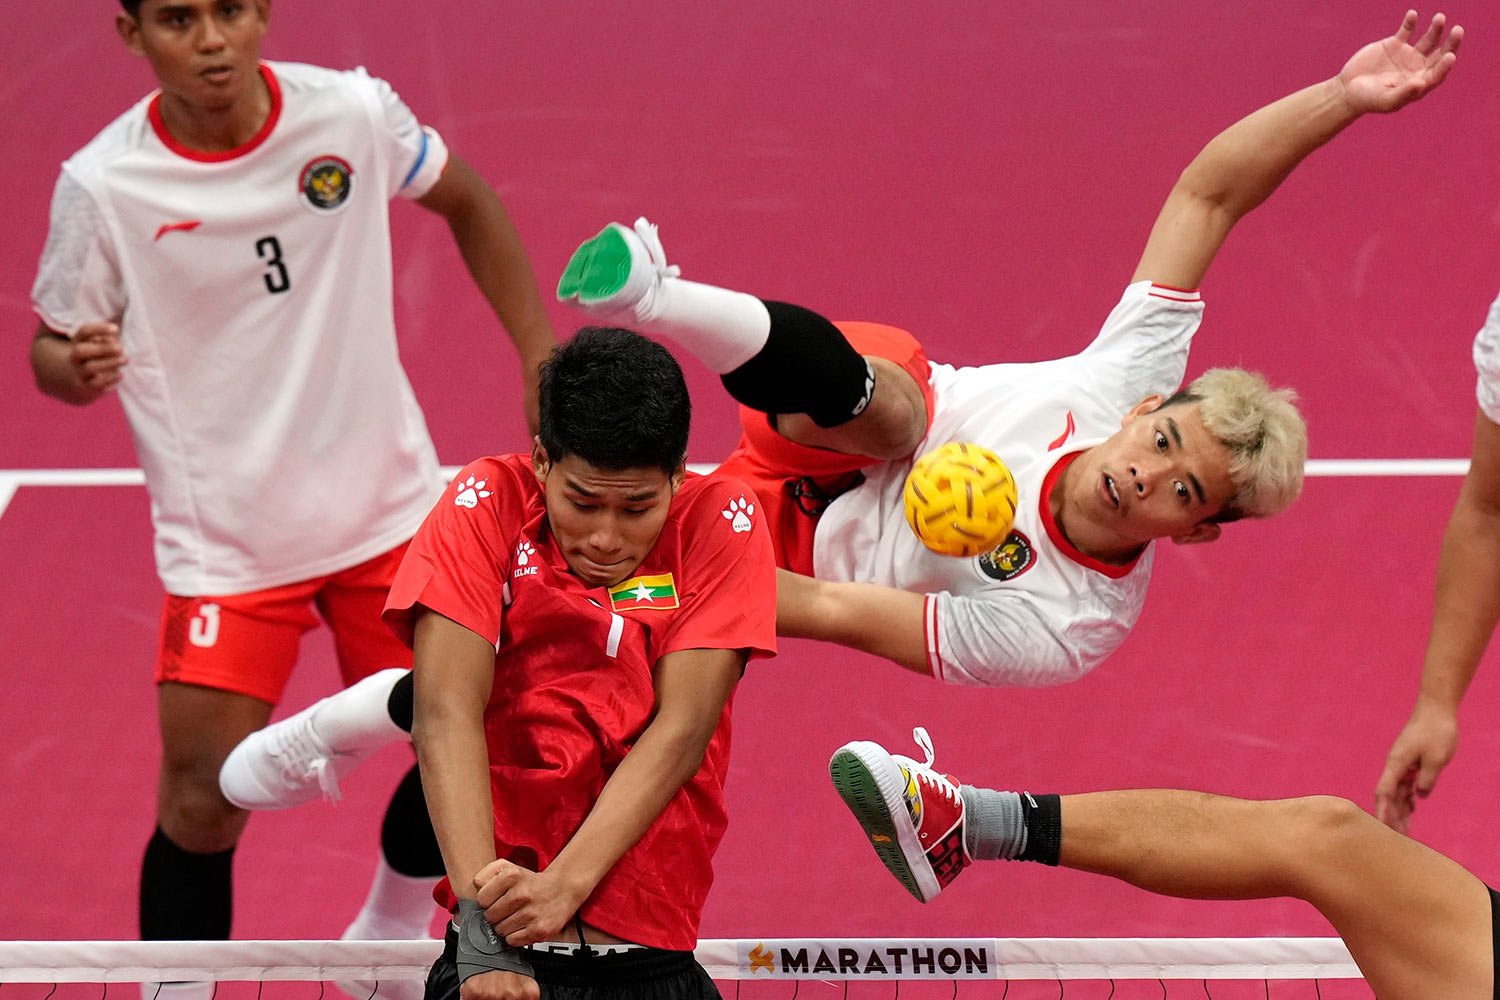  Indonesia's Rusdi Rusdi returns the ball during men's Group A sepaktakraw preliminary match against Myanmar at Jinhua Sports Centre at the 19th Asian Games in Jinhua, China, Jinhua, Monday, Oct. 2, 2023. (AP Photo/Eugene Hoshiko) 